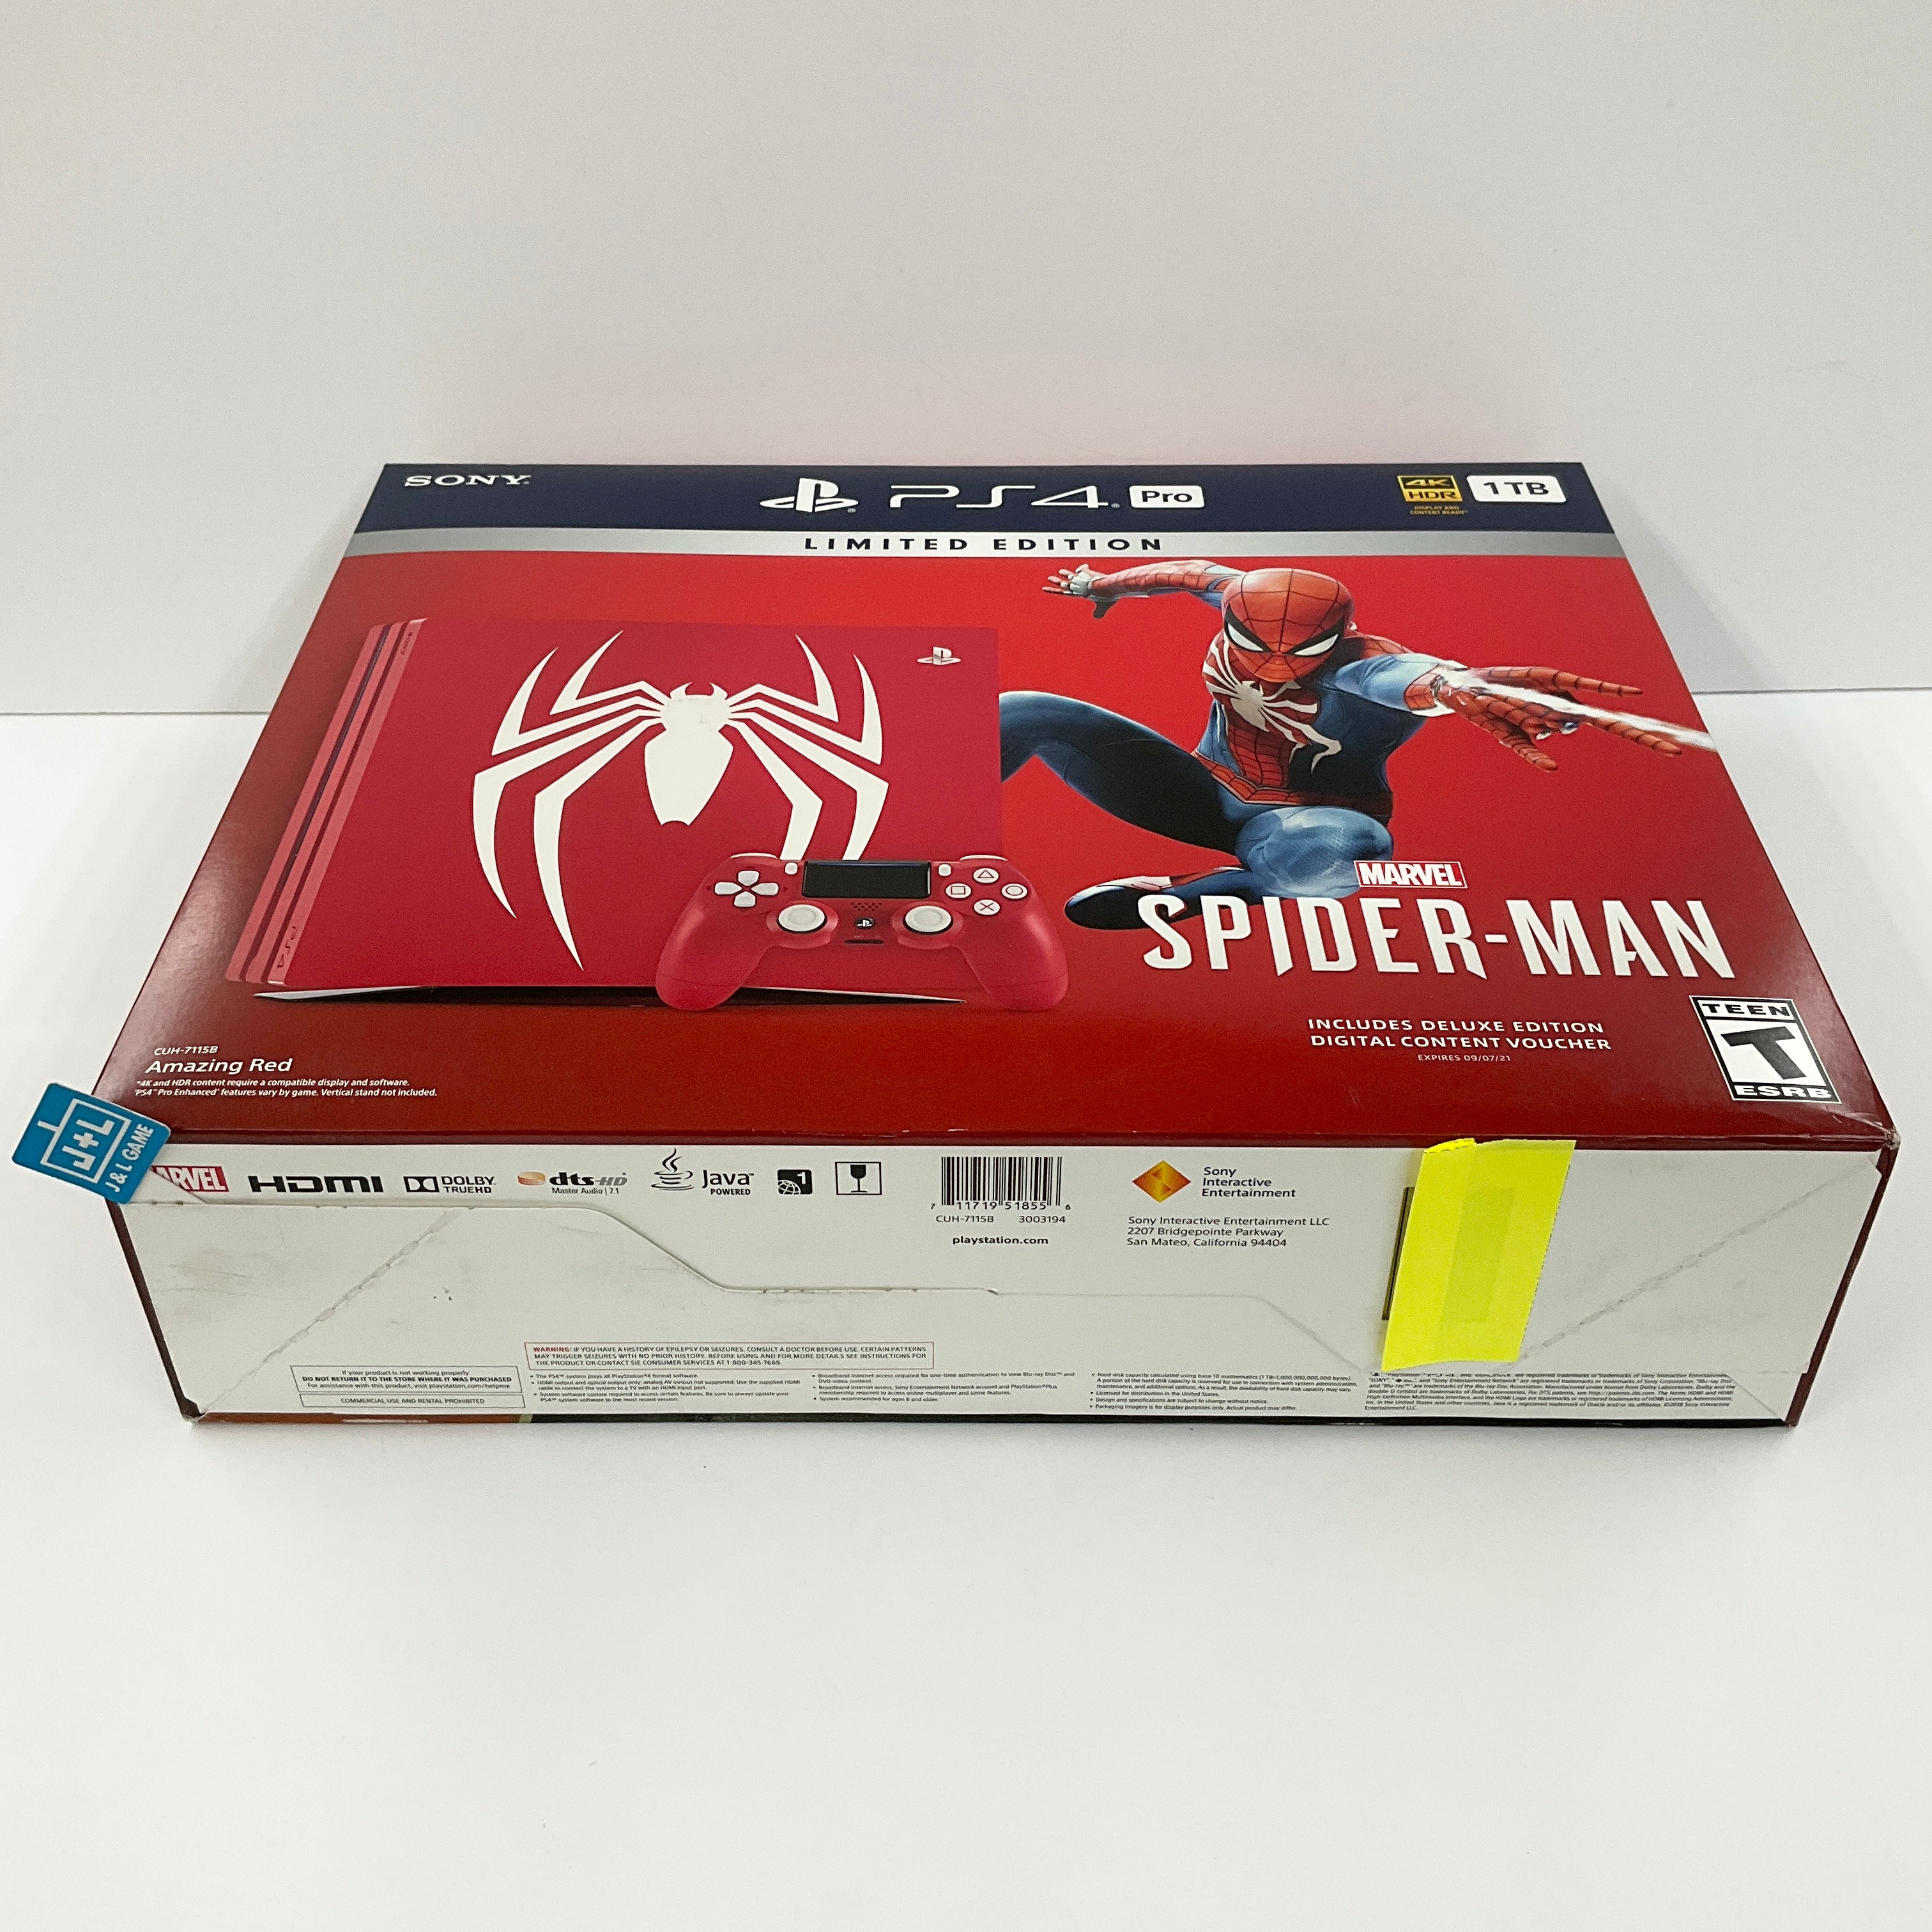 SONY PlayStation 4 Pro 1TB Limited Edition Console (Marvel's Spider-Man Bundle) - (PS4) PlayStation 4 Consoles Sony   